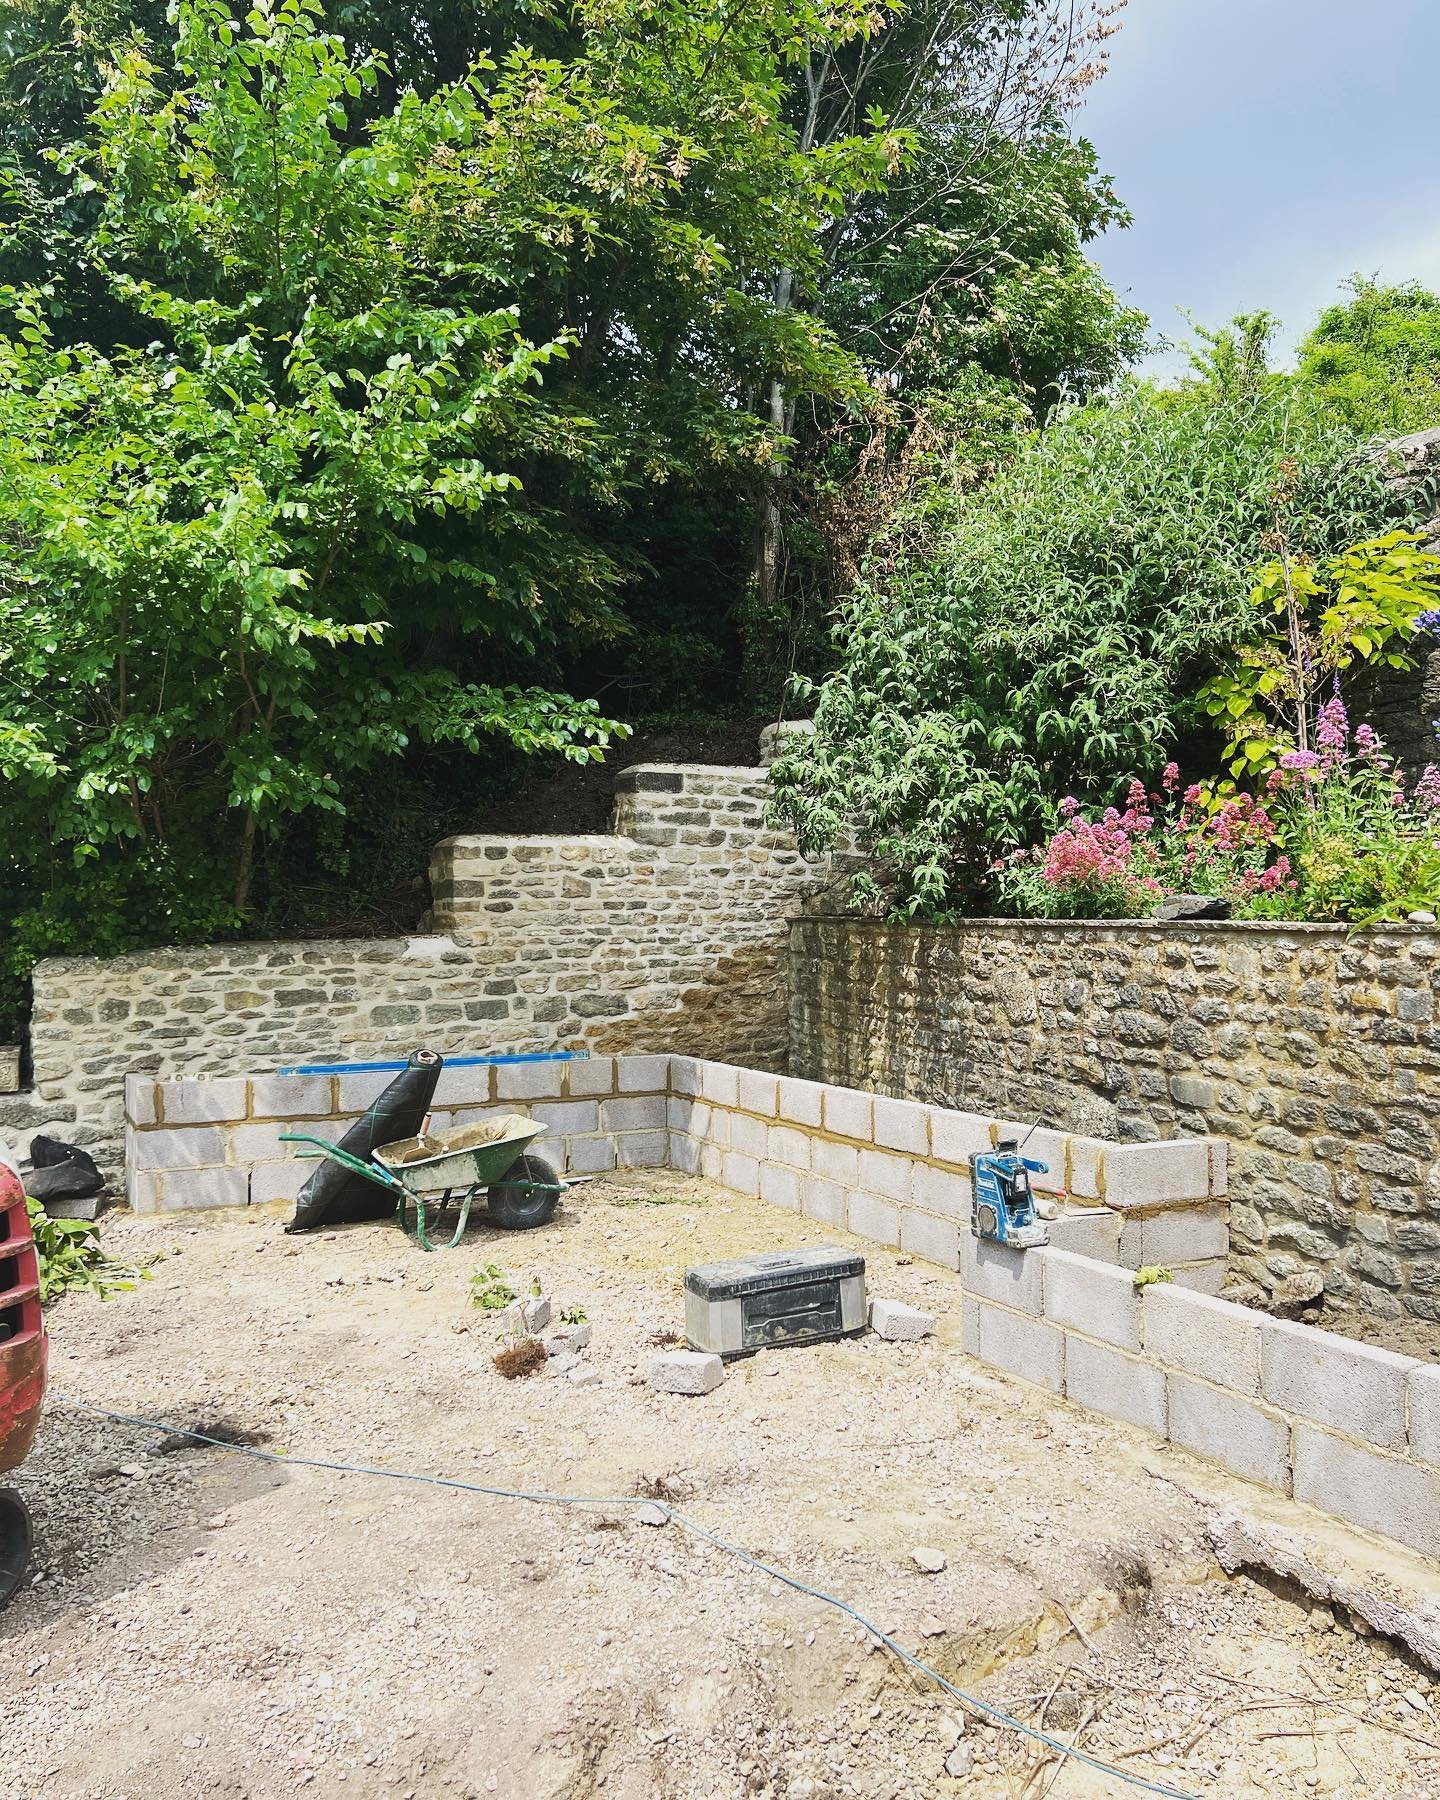 Early progress in Swainswick this week. Raised beds going up in preparation for cladding and planting. Water feature and gnarled Olive trees TBC&hellip; Views over the valley will make for a great setting once this one is finished.